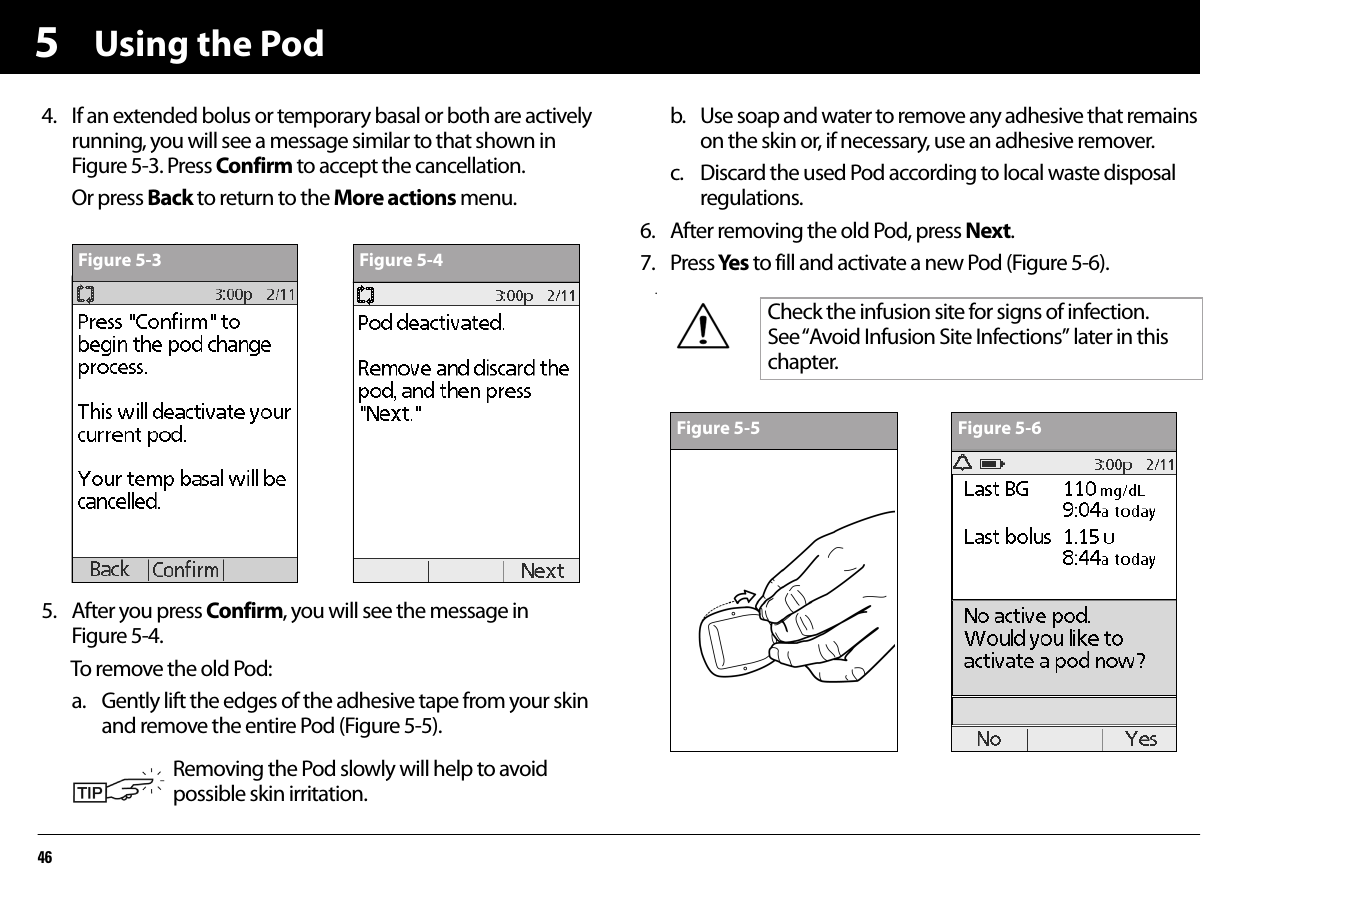 Using the Pod4654. If an extended bolus or temporary basal or both are actively running, you will see a message similar to that shown in Figure 5-3. Press Confirm to accept the cancellation.Or press Back to return to the More actions menu.5. After you press Confirm, you will see the message inFigure 5-4.To remove the old Pod:a. Gently lift the edges of the adhesive tape from your skin and remove the entire Pod (Figure 5-5). b. Use soap and water to remove any adhesive that remains on the skin or, if necessary, use an adhesive remover.c. Discard the used Pod according to local waste disposal regulations.6. After removing the old Pod, press Next.7. Press Yes  to fill and activate a new Pod (Figure 5-6)..Removing the Pod slowly will help to avoid possible skin irritation.Figure 5-3 Figure 5-4Check the infusion site for signs of infection. See “Avoid Infusion Site Infections” later in this chapter.Figure 5-5 Figure 5-6